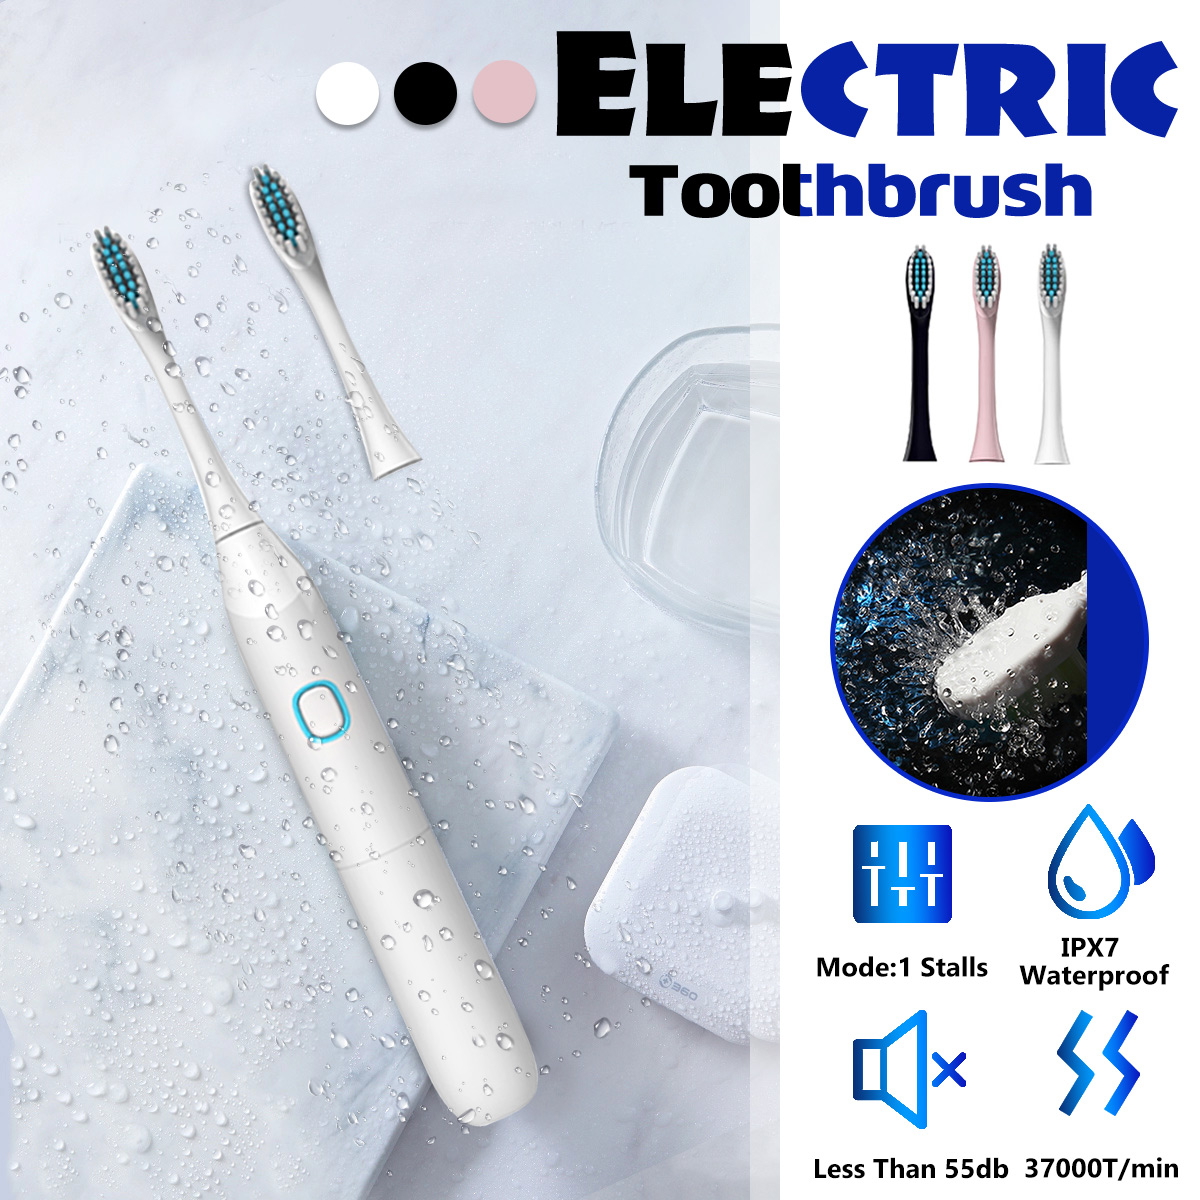 Acoustic Wave Vibration Waterproof Soft Electric Toothbrush IPX7 Waterproof